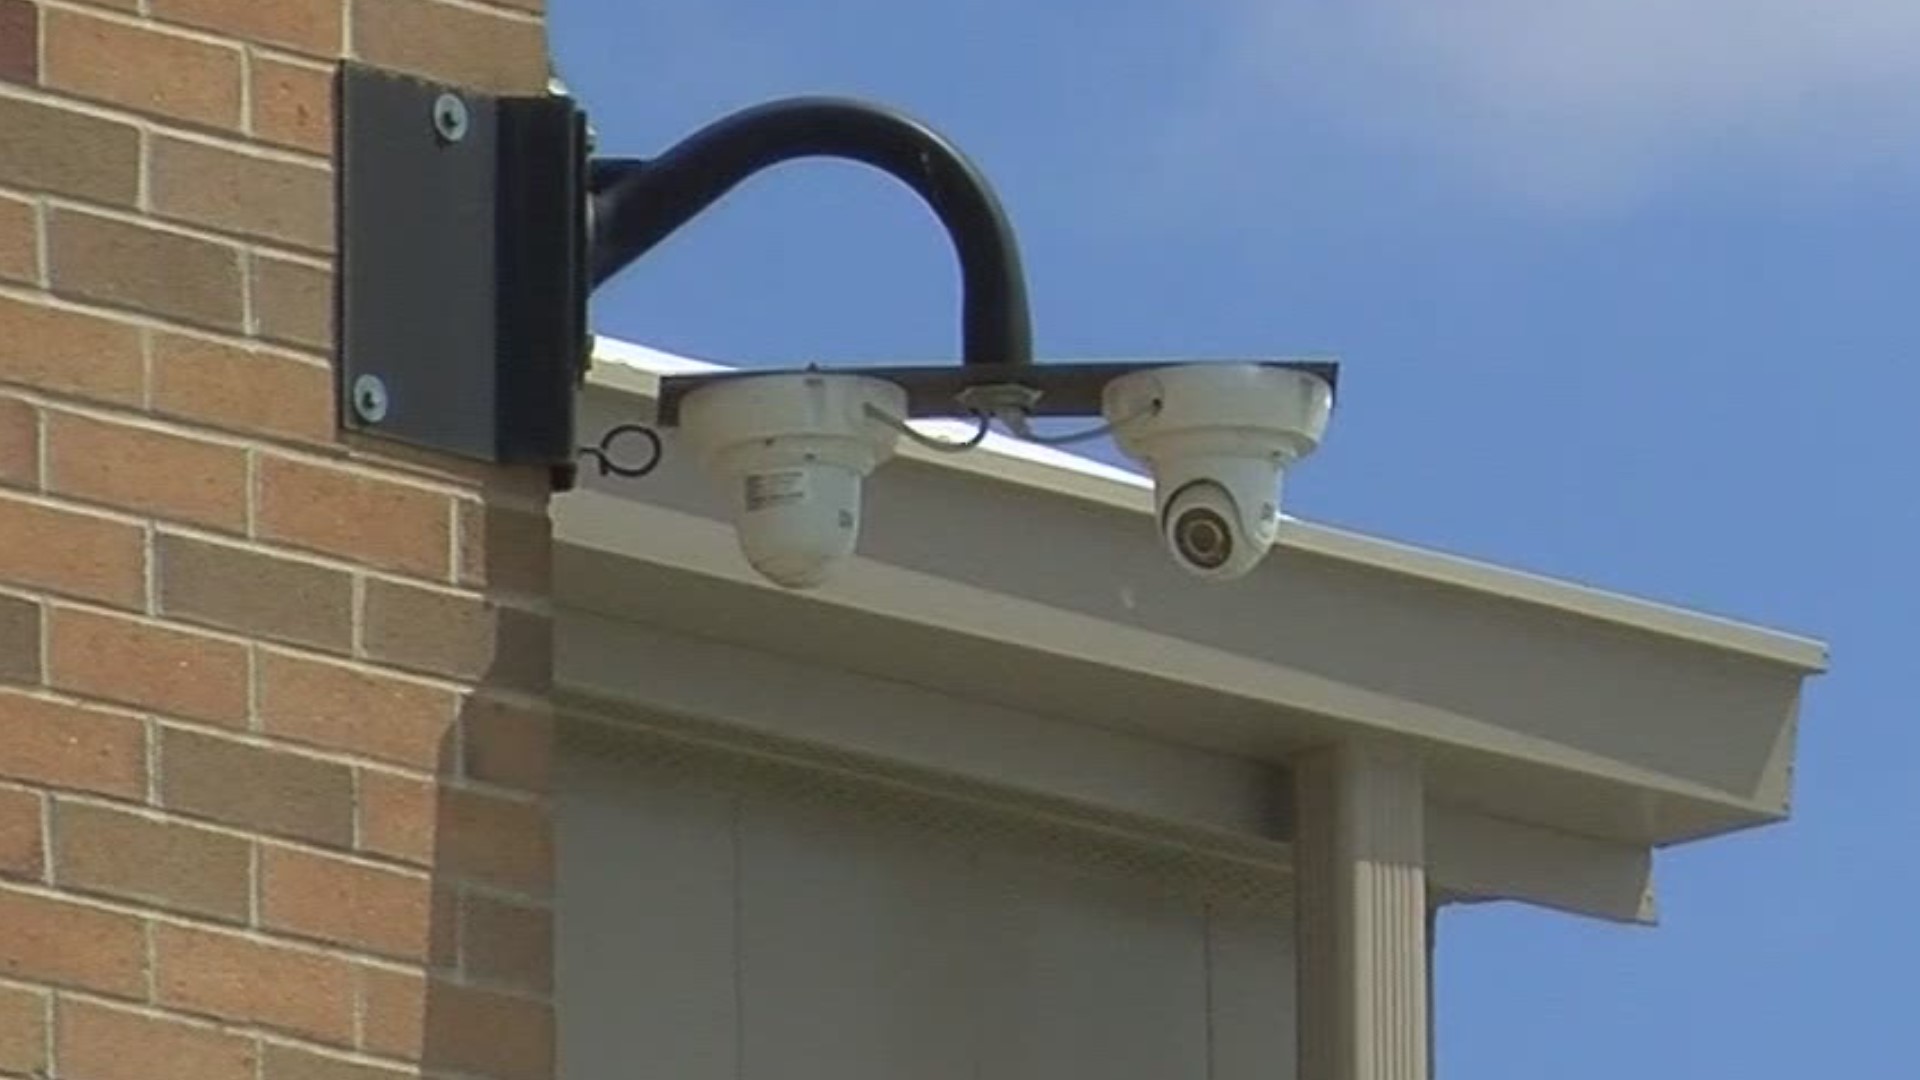 The district has around 275 cameras and they're looking to expand to around 300 to cover certain blind spots.